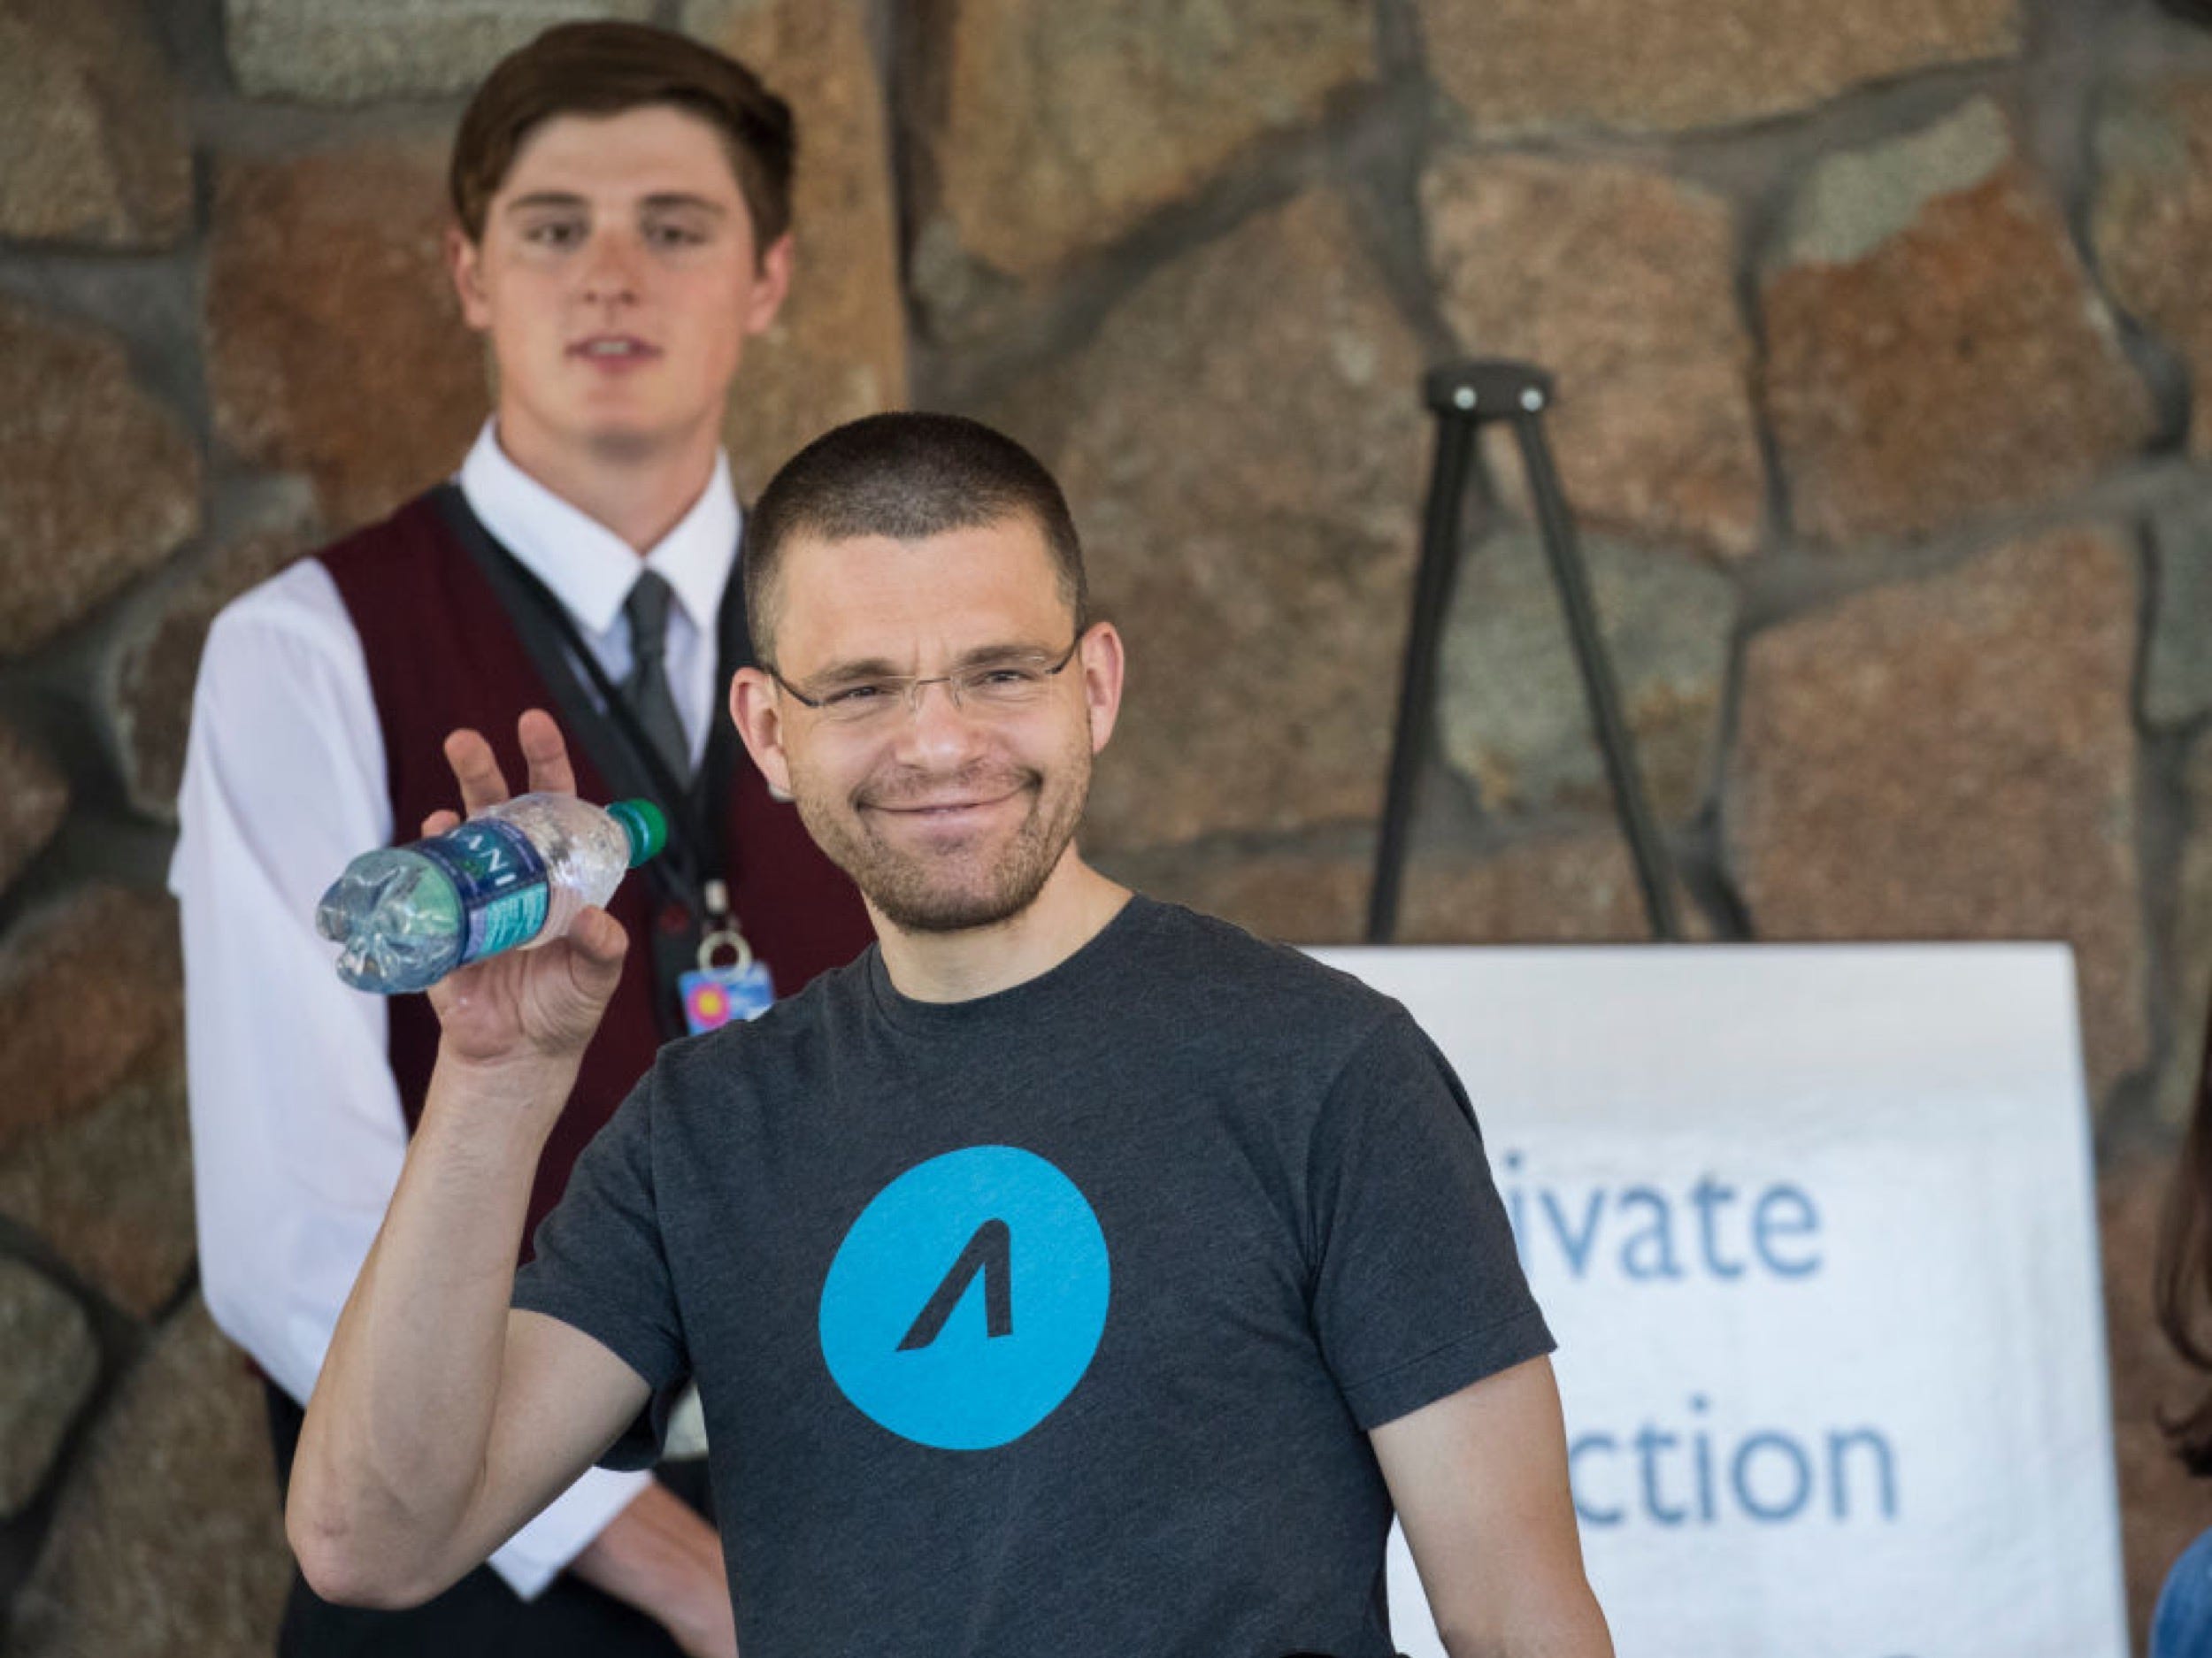 max levchin affirm SUN VALLEY, ID - JULY 10: Max Levchin, co-founder of PayPal and chief executive officer of financial technology company Affirm, arrives at the Sun Valley Resort for the annual Allen & Company Sun Valley Conference, July 10, 2018 in Sun Valley, Idaho. Every July, some of the world's wealthiest and most powerful business people in media, finance, technology and political spheres converge at the Sun Valley Resort for the exclusive week-long conference. (Photo by Drew Angerer/Getty Images)